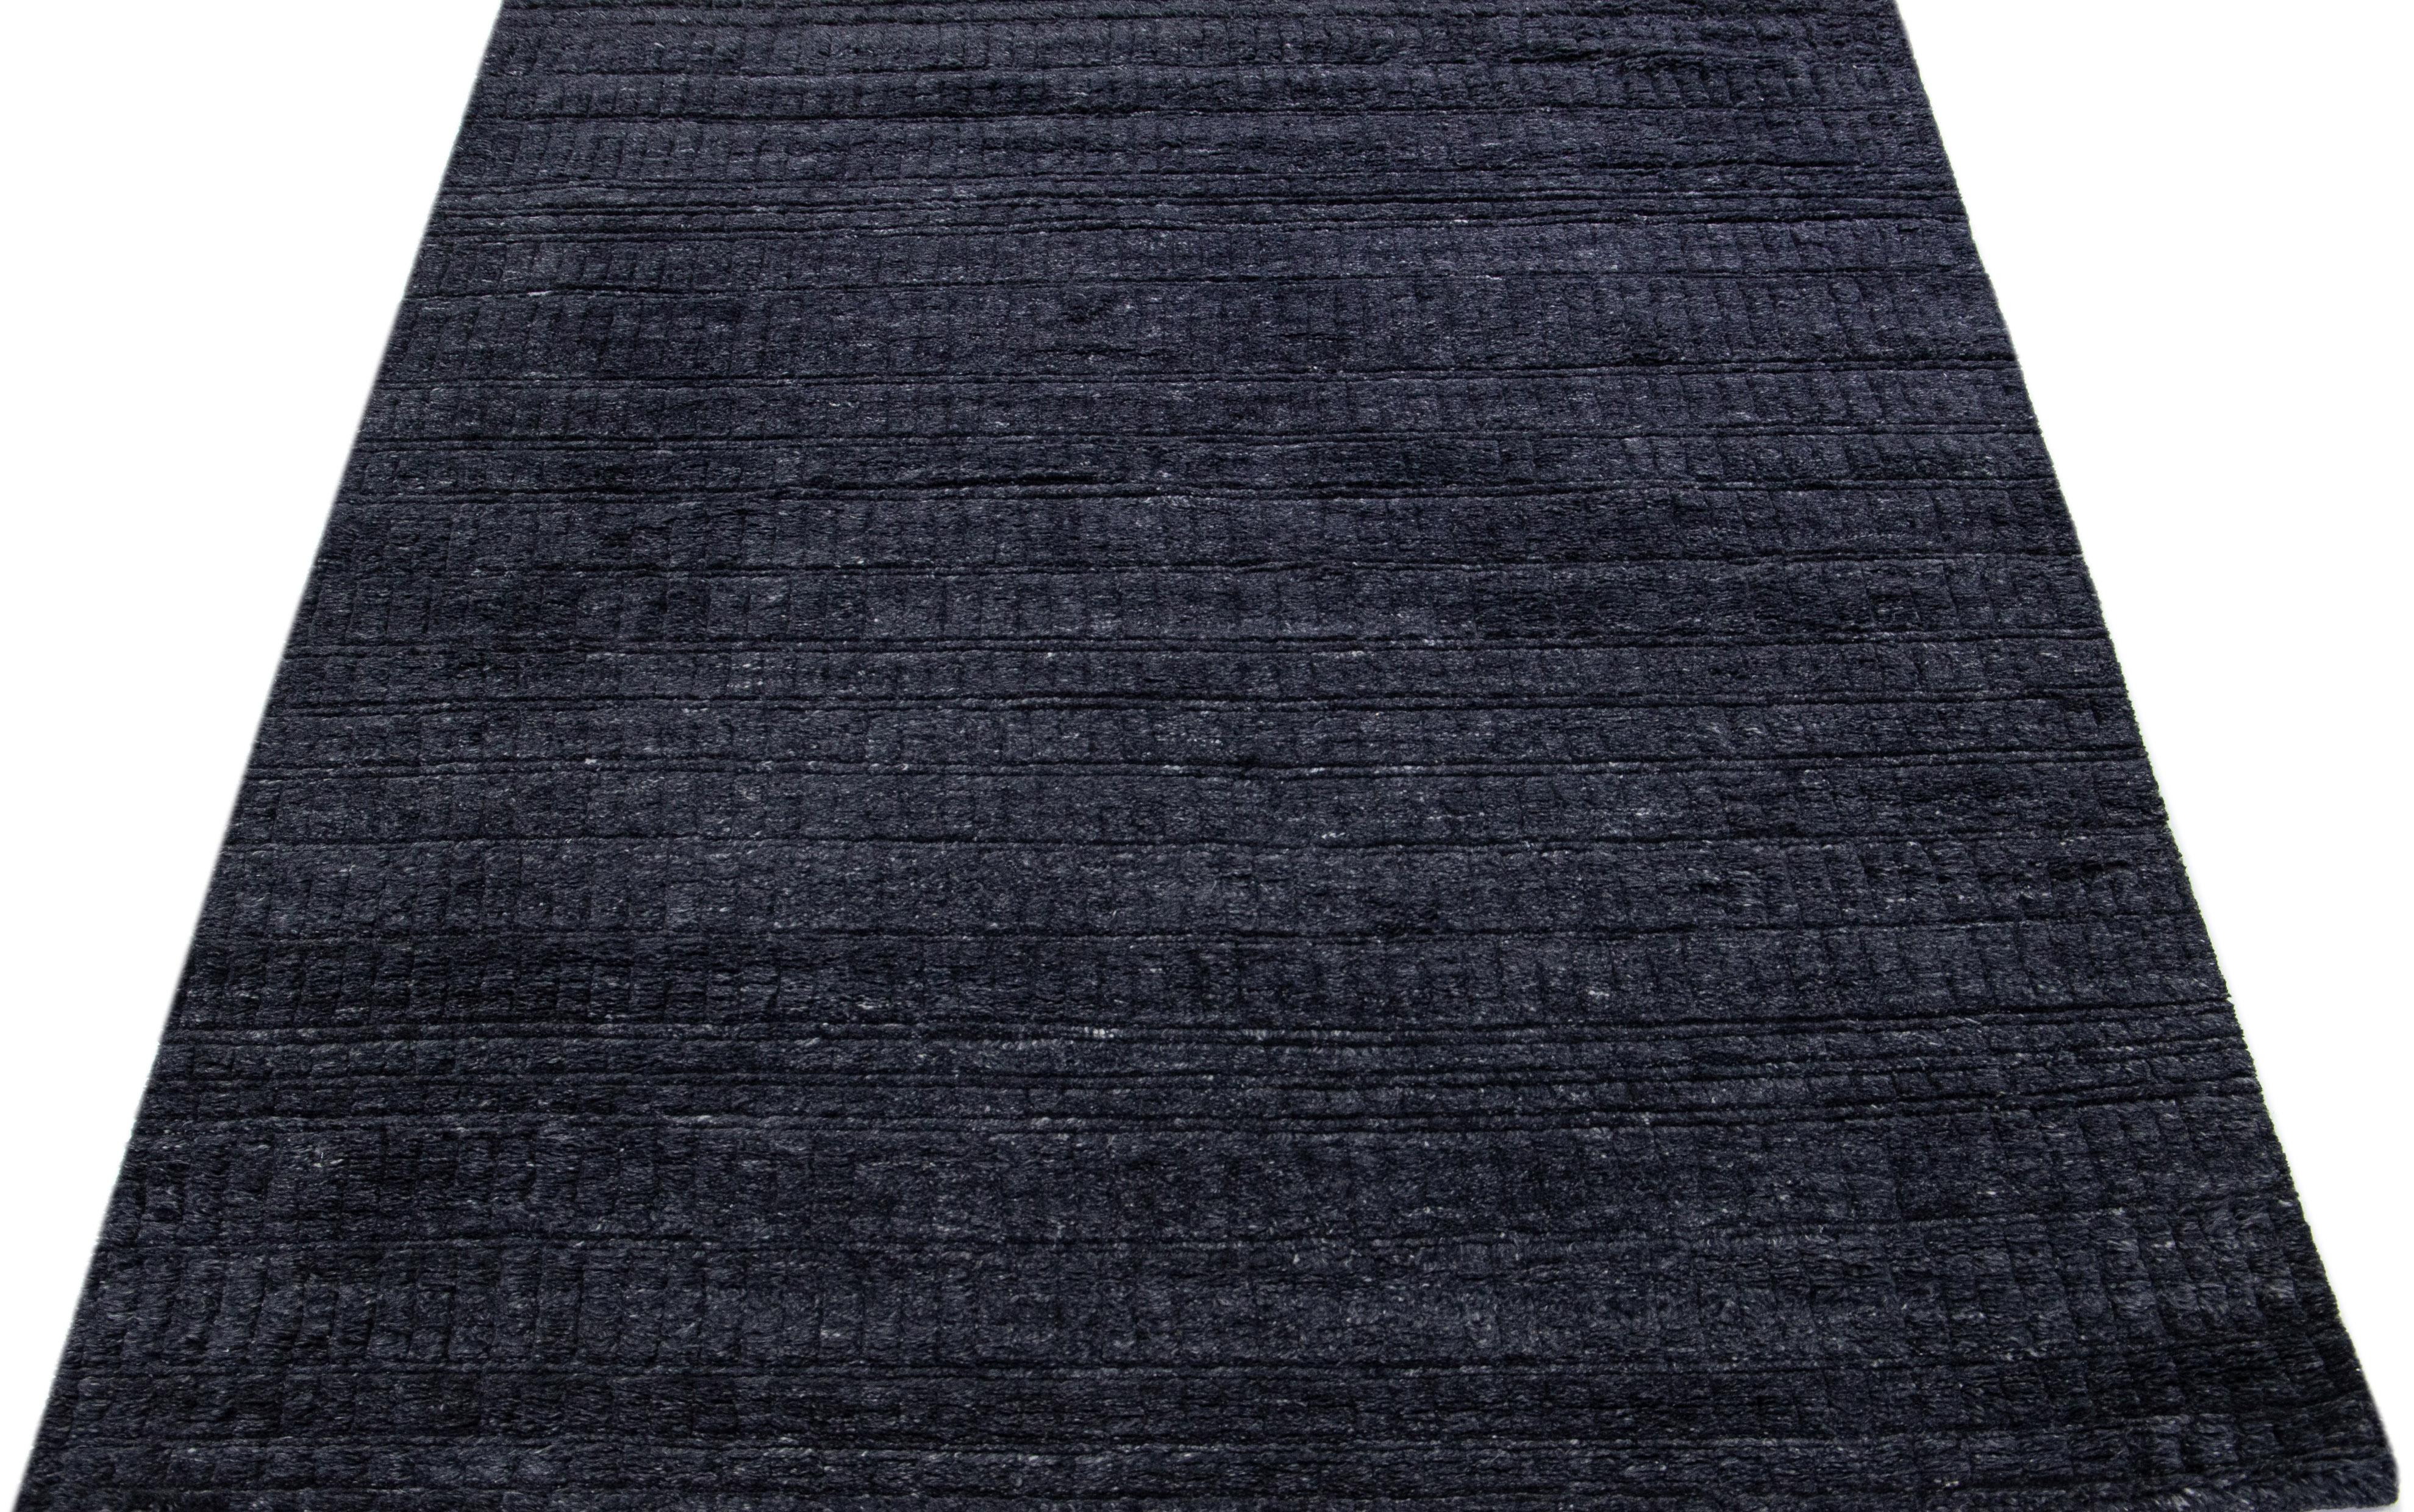 Beautiful Contemporary Moroccan Texture Home Collection rugs. This Indian hand-knotted rug is made of wool and has a gray-charcoal color field in a minimalist design. 

This rug measures: 7'7